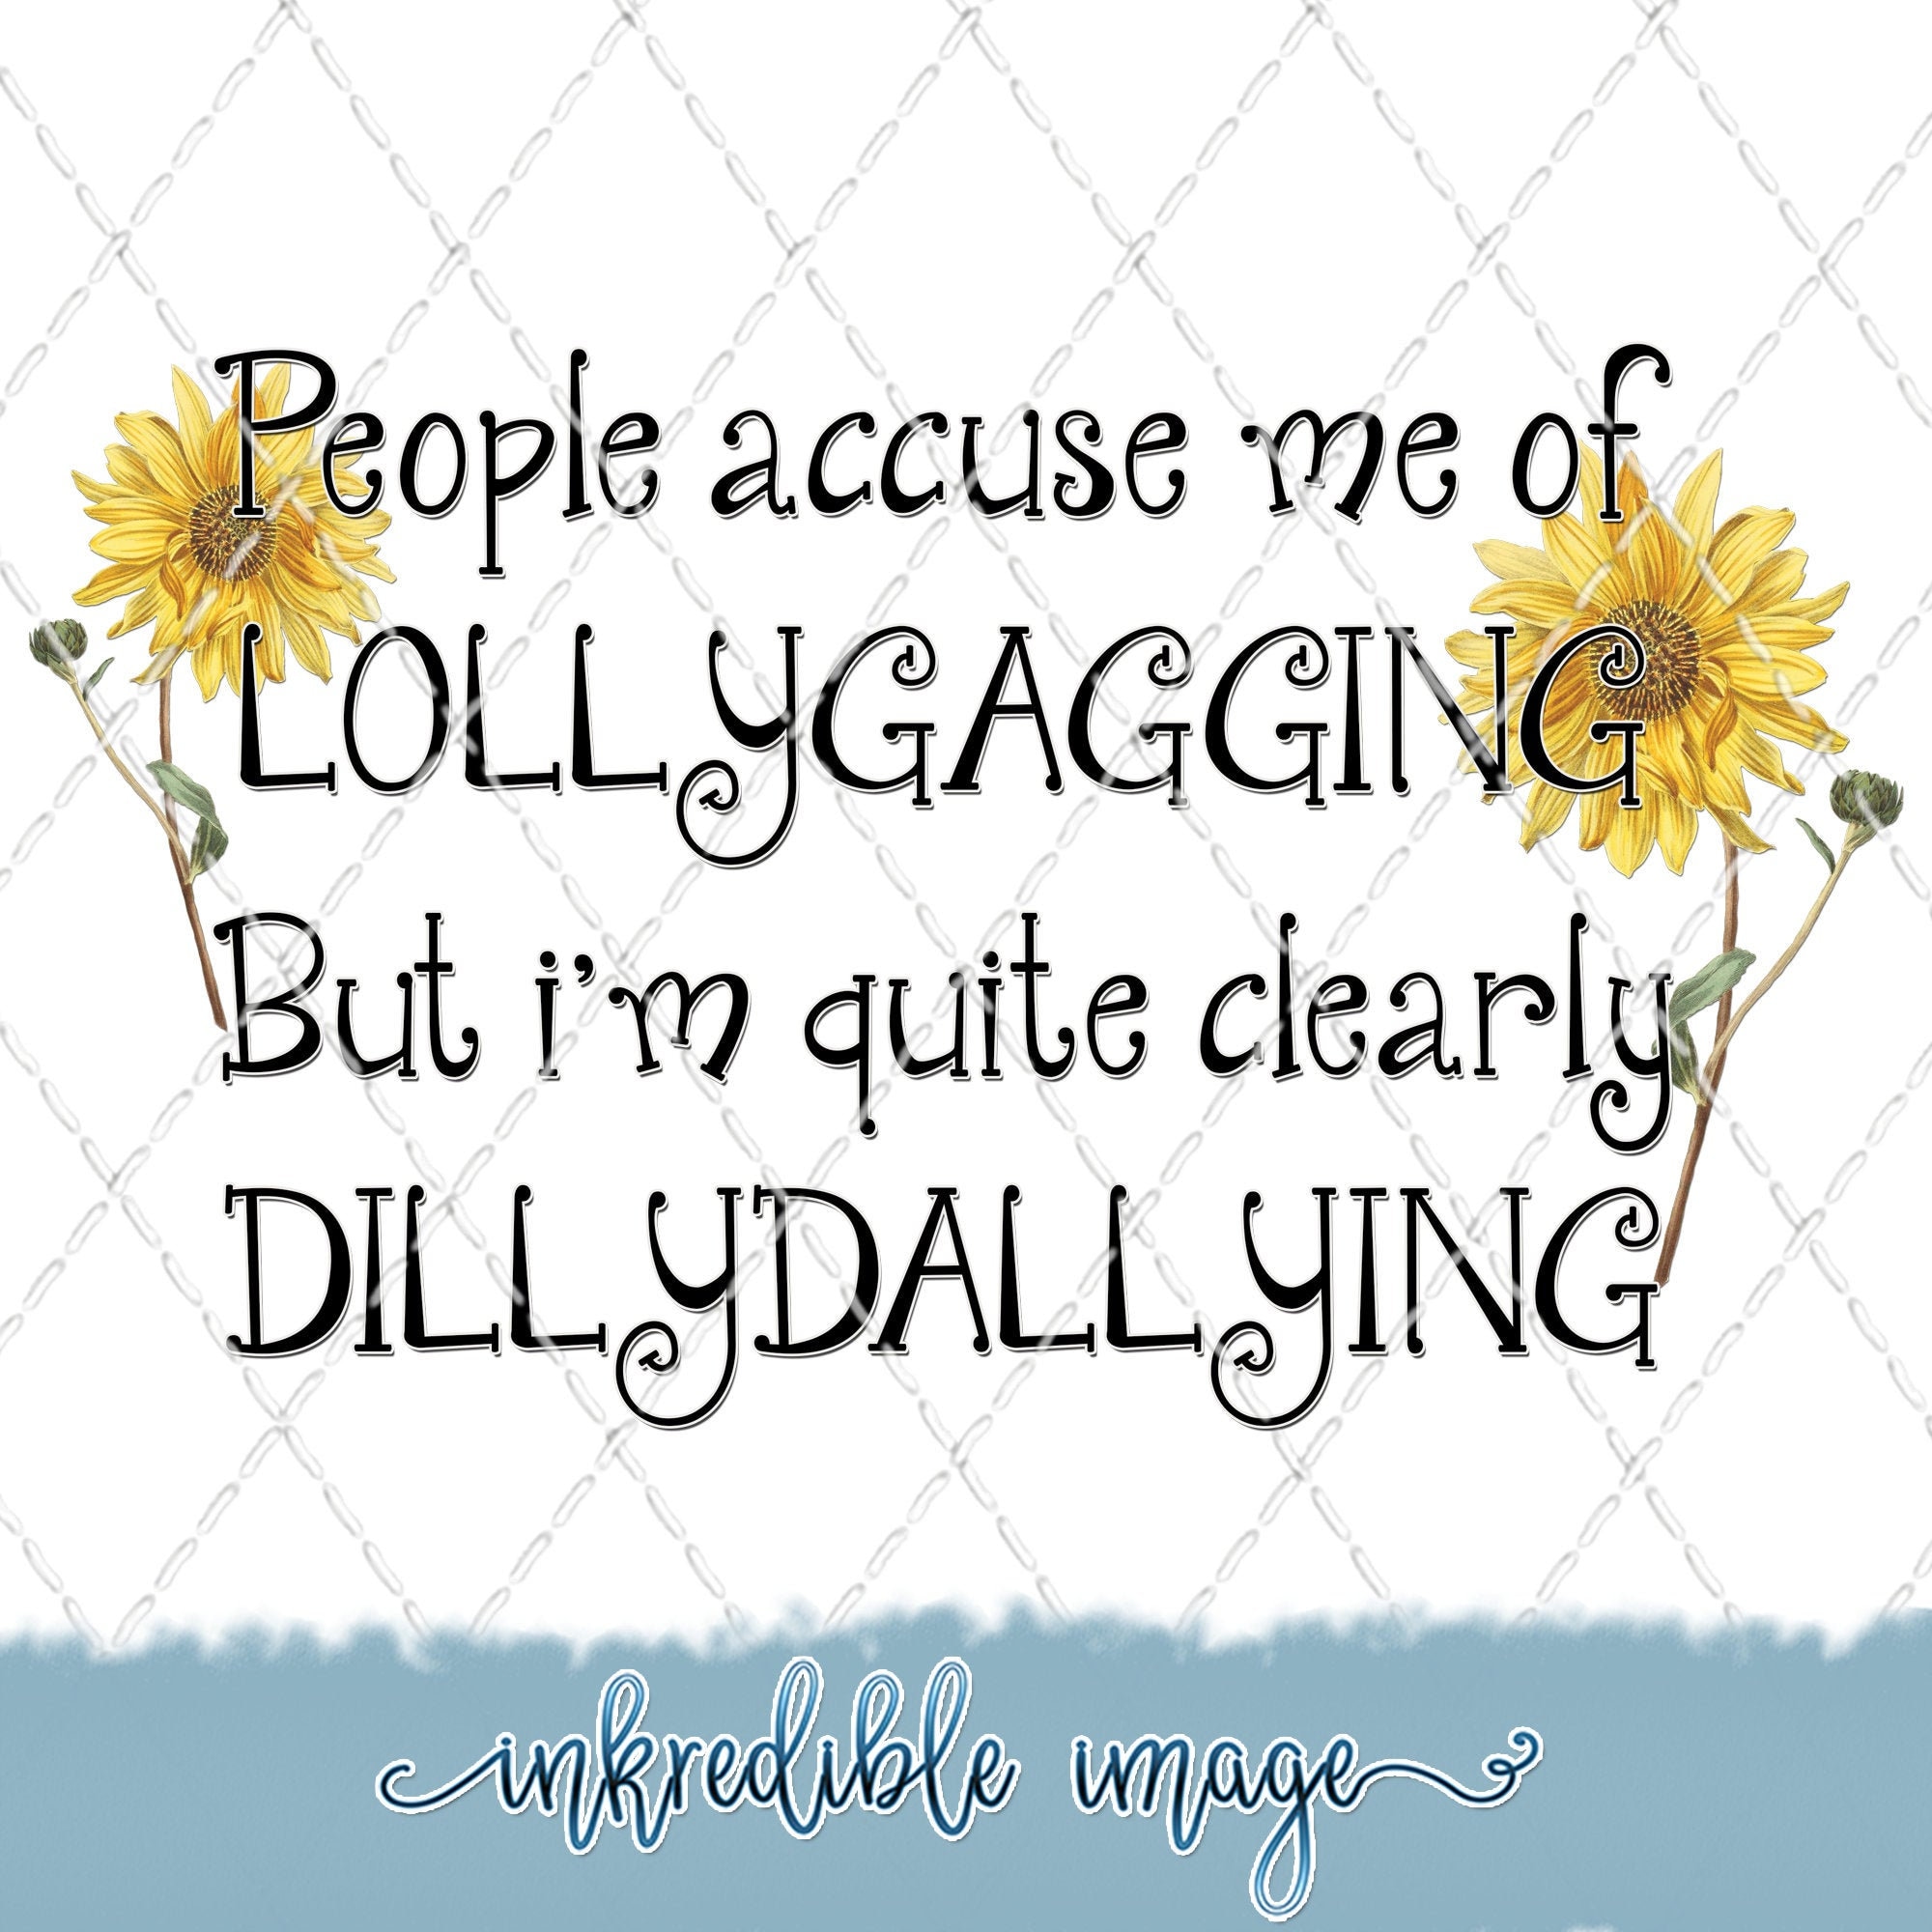 Lollygaggin or just Dilly-dallying – my life